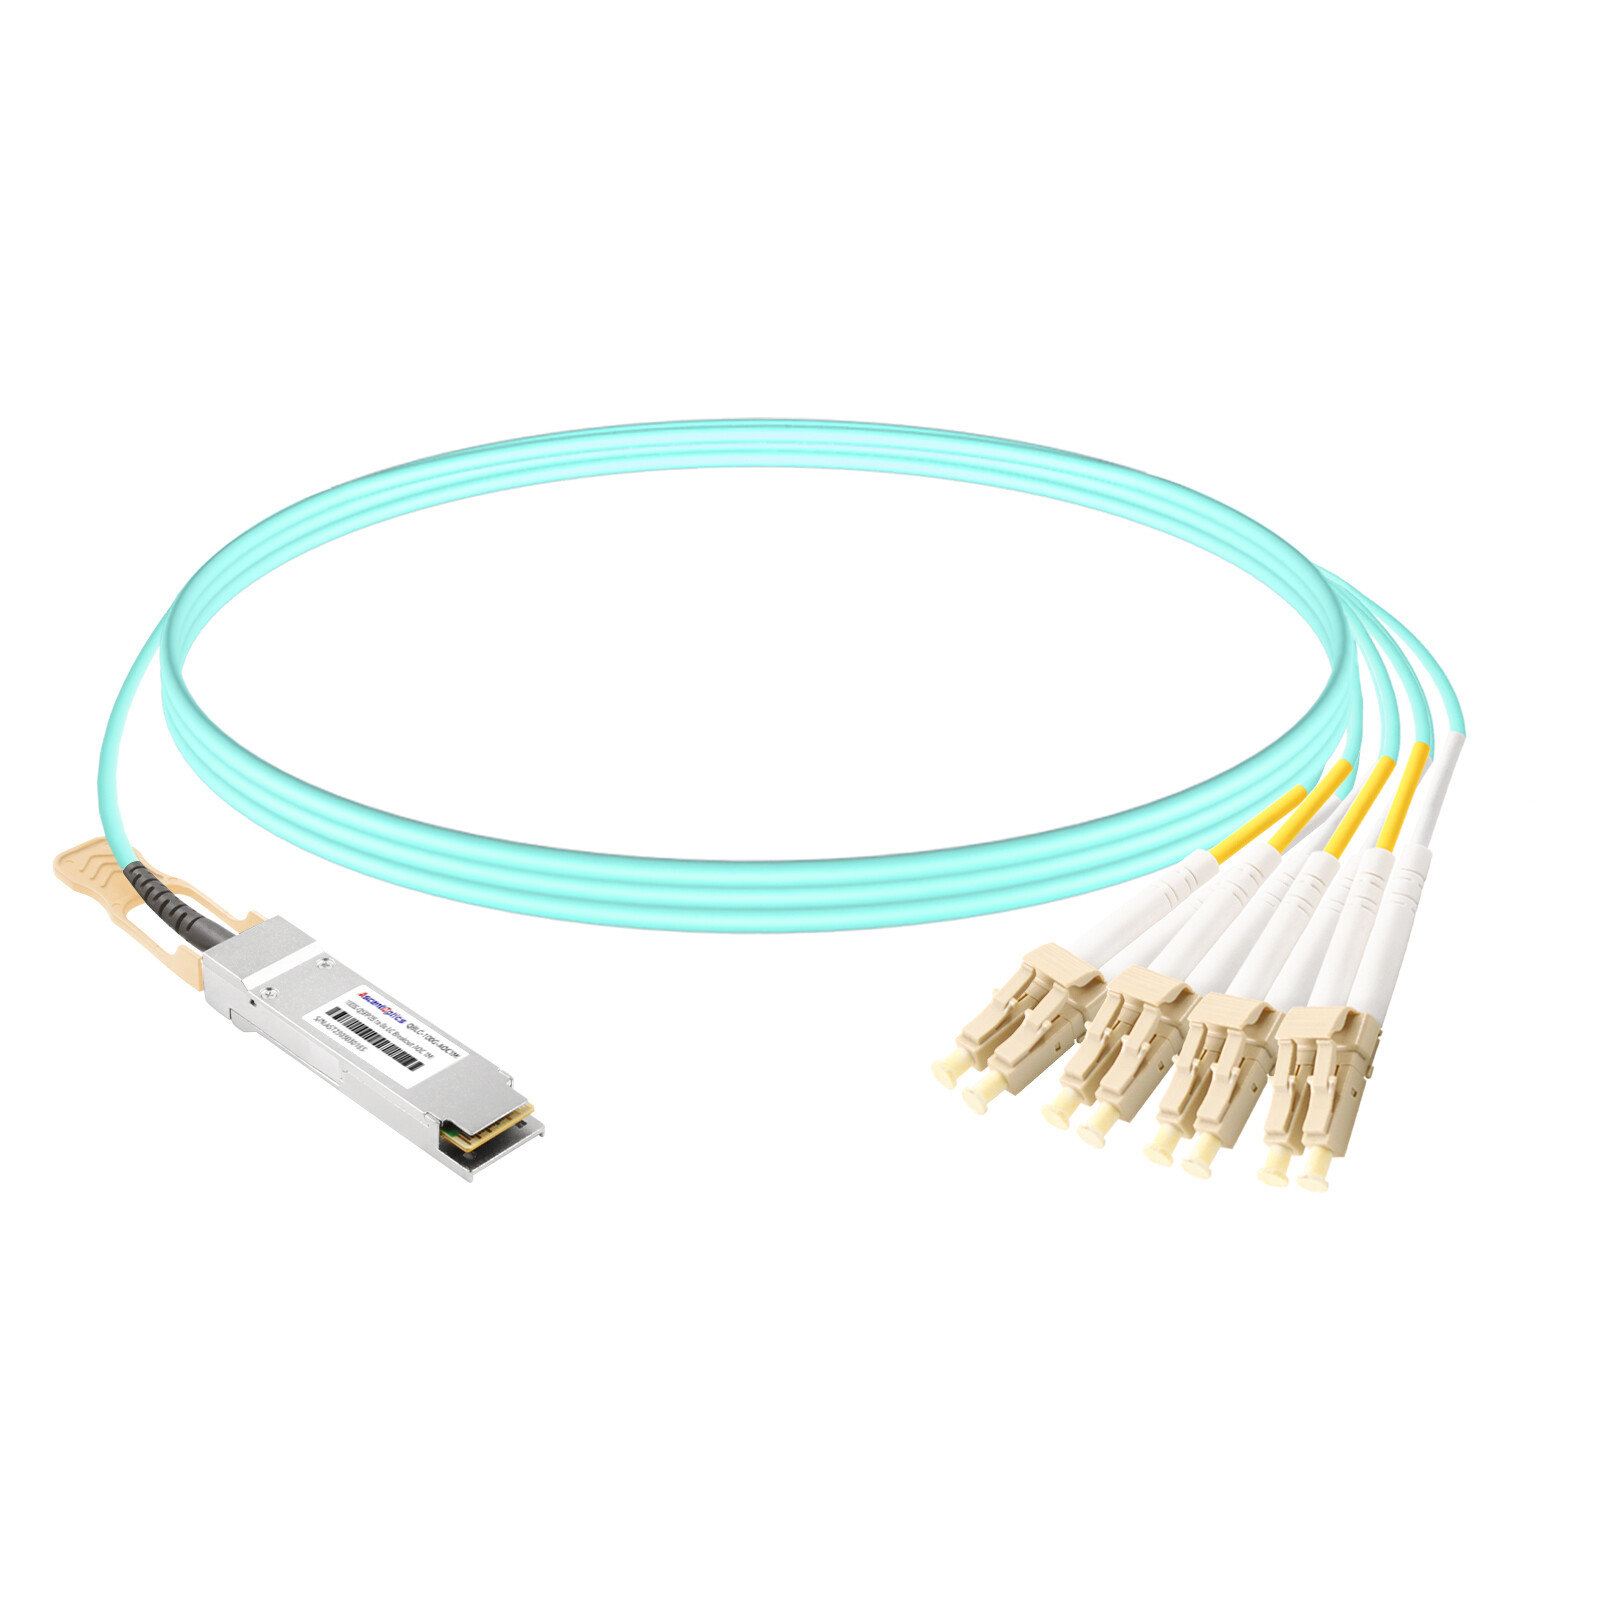 100G QSFP28 to 8x LC Breakout AOC Cable,1 Meter